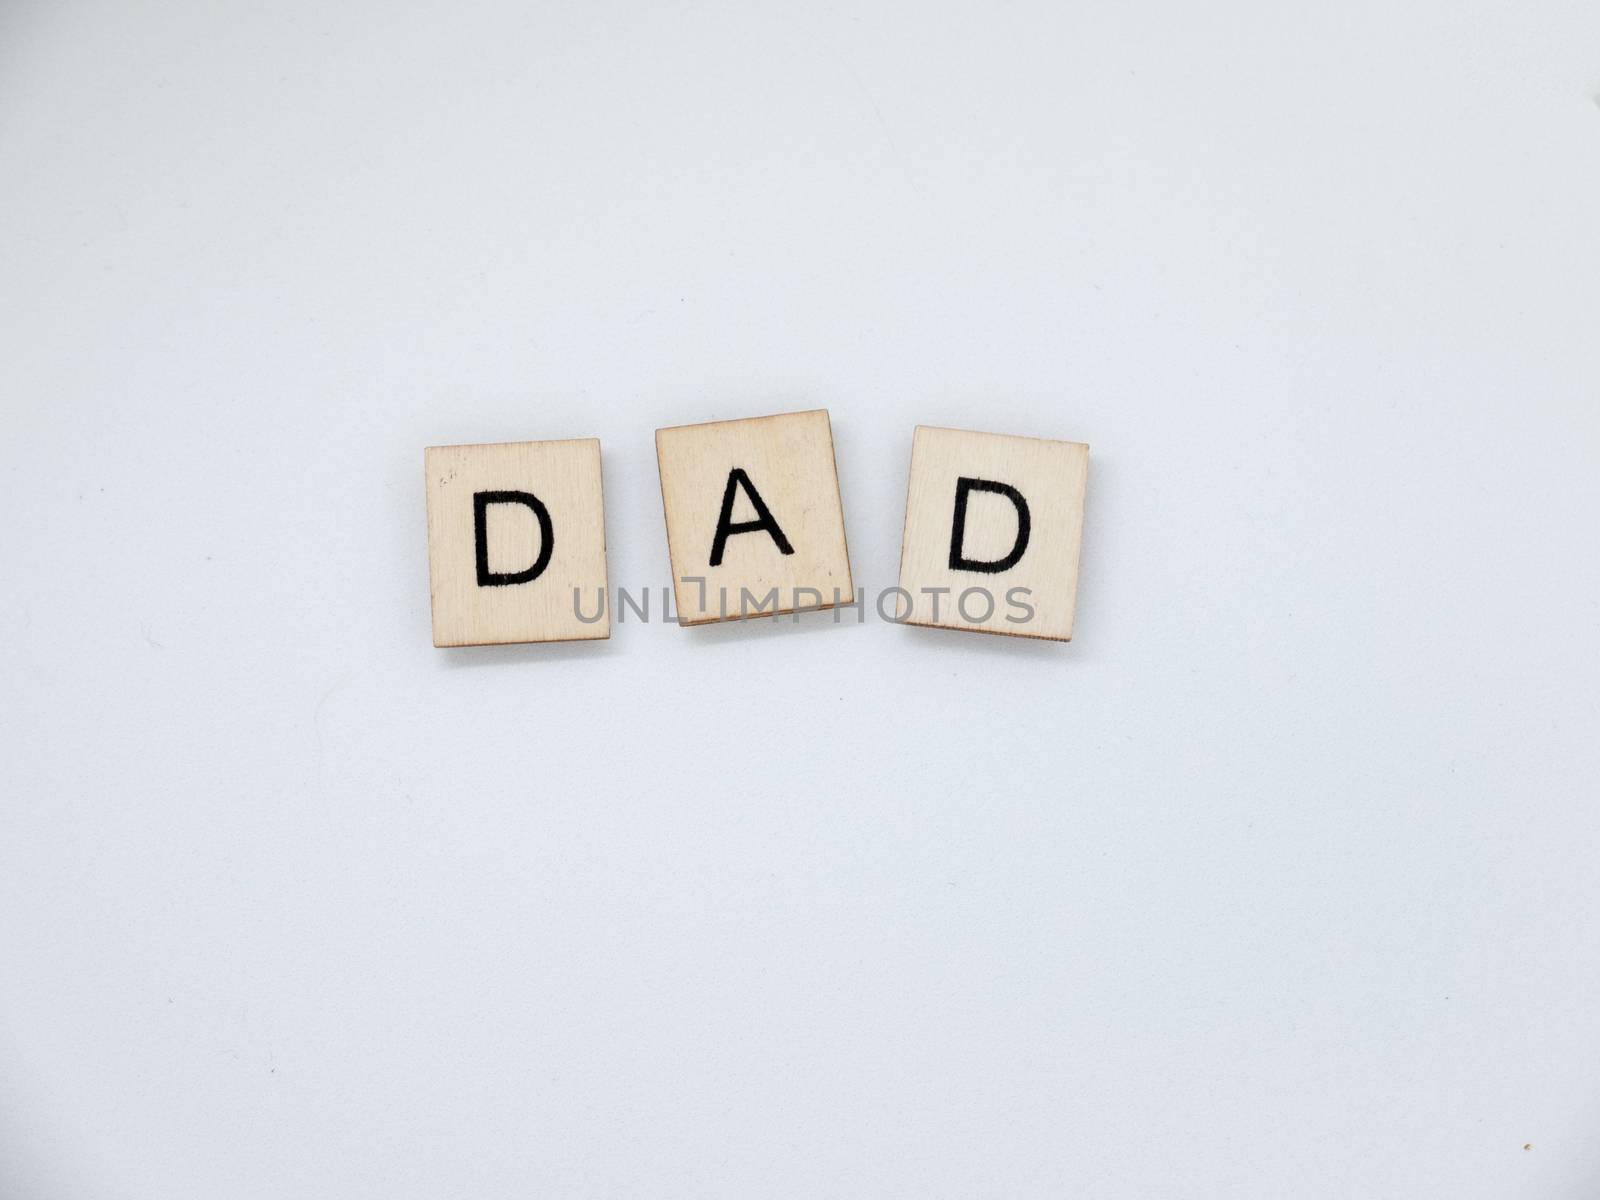 The word "Dad" spelled out with wooden letter tiles.